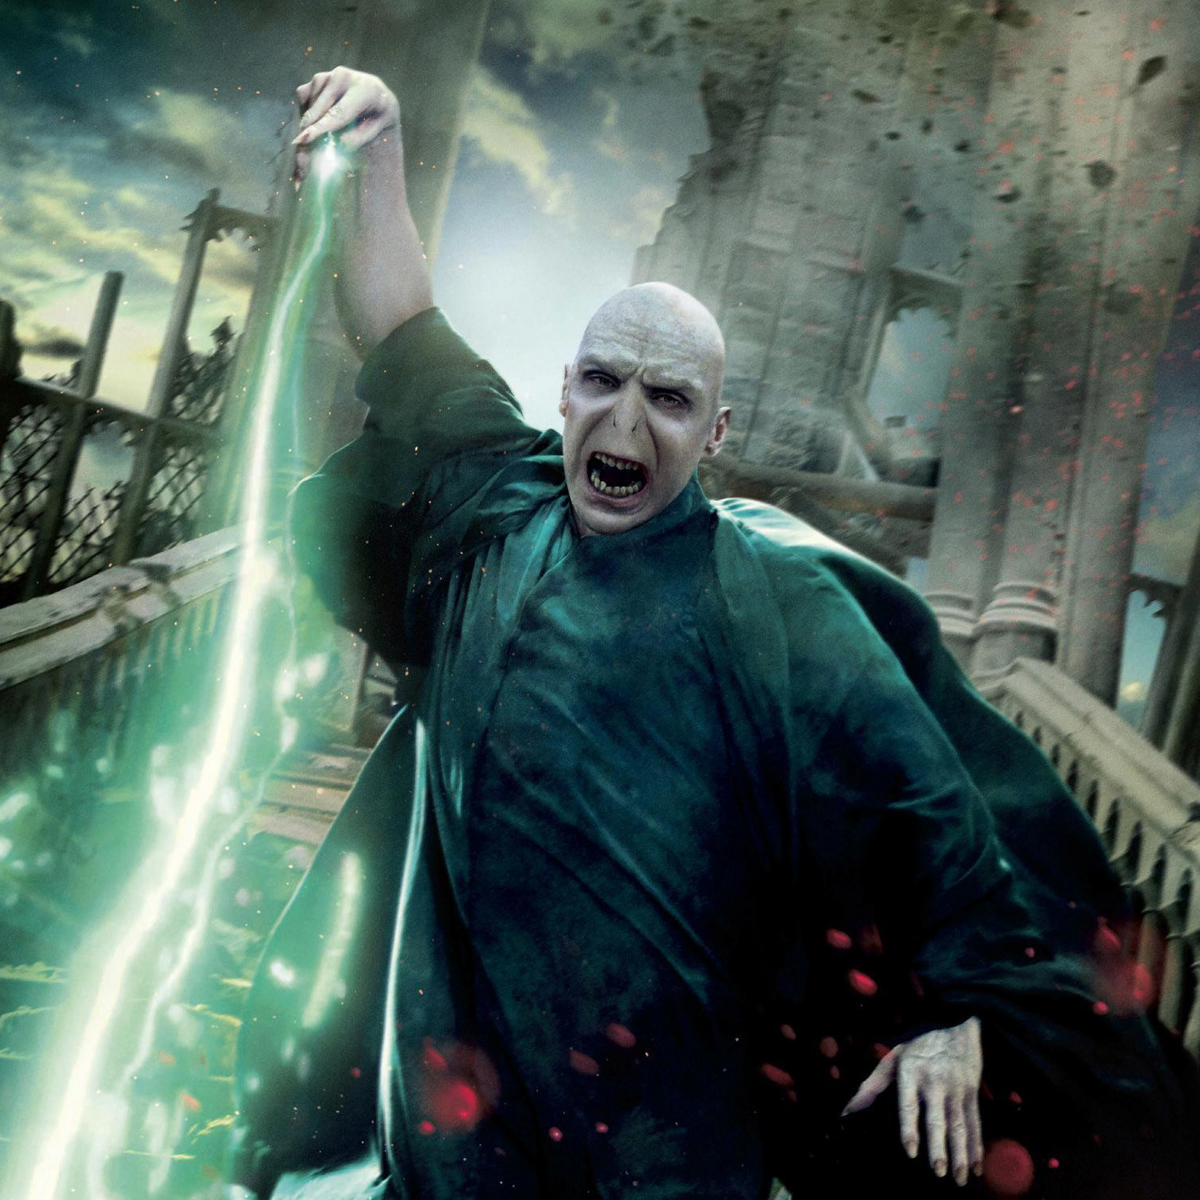 Wooblers, meet Lord Voldemort™. You-Know-Who has been wooblified in th